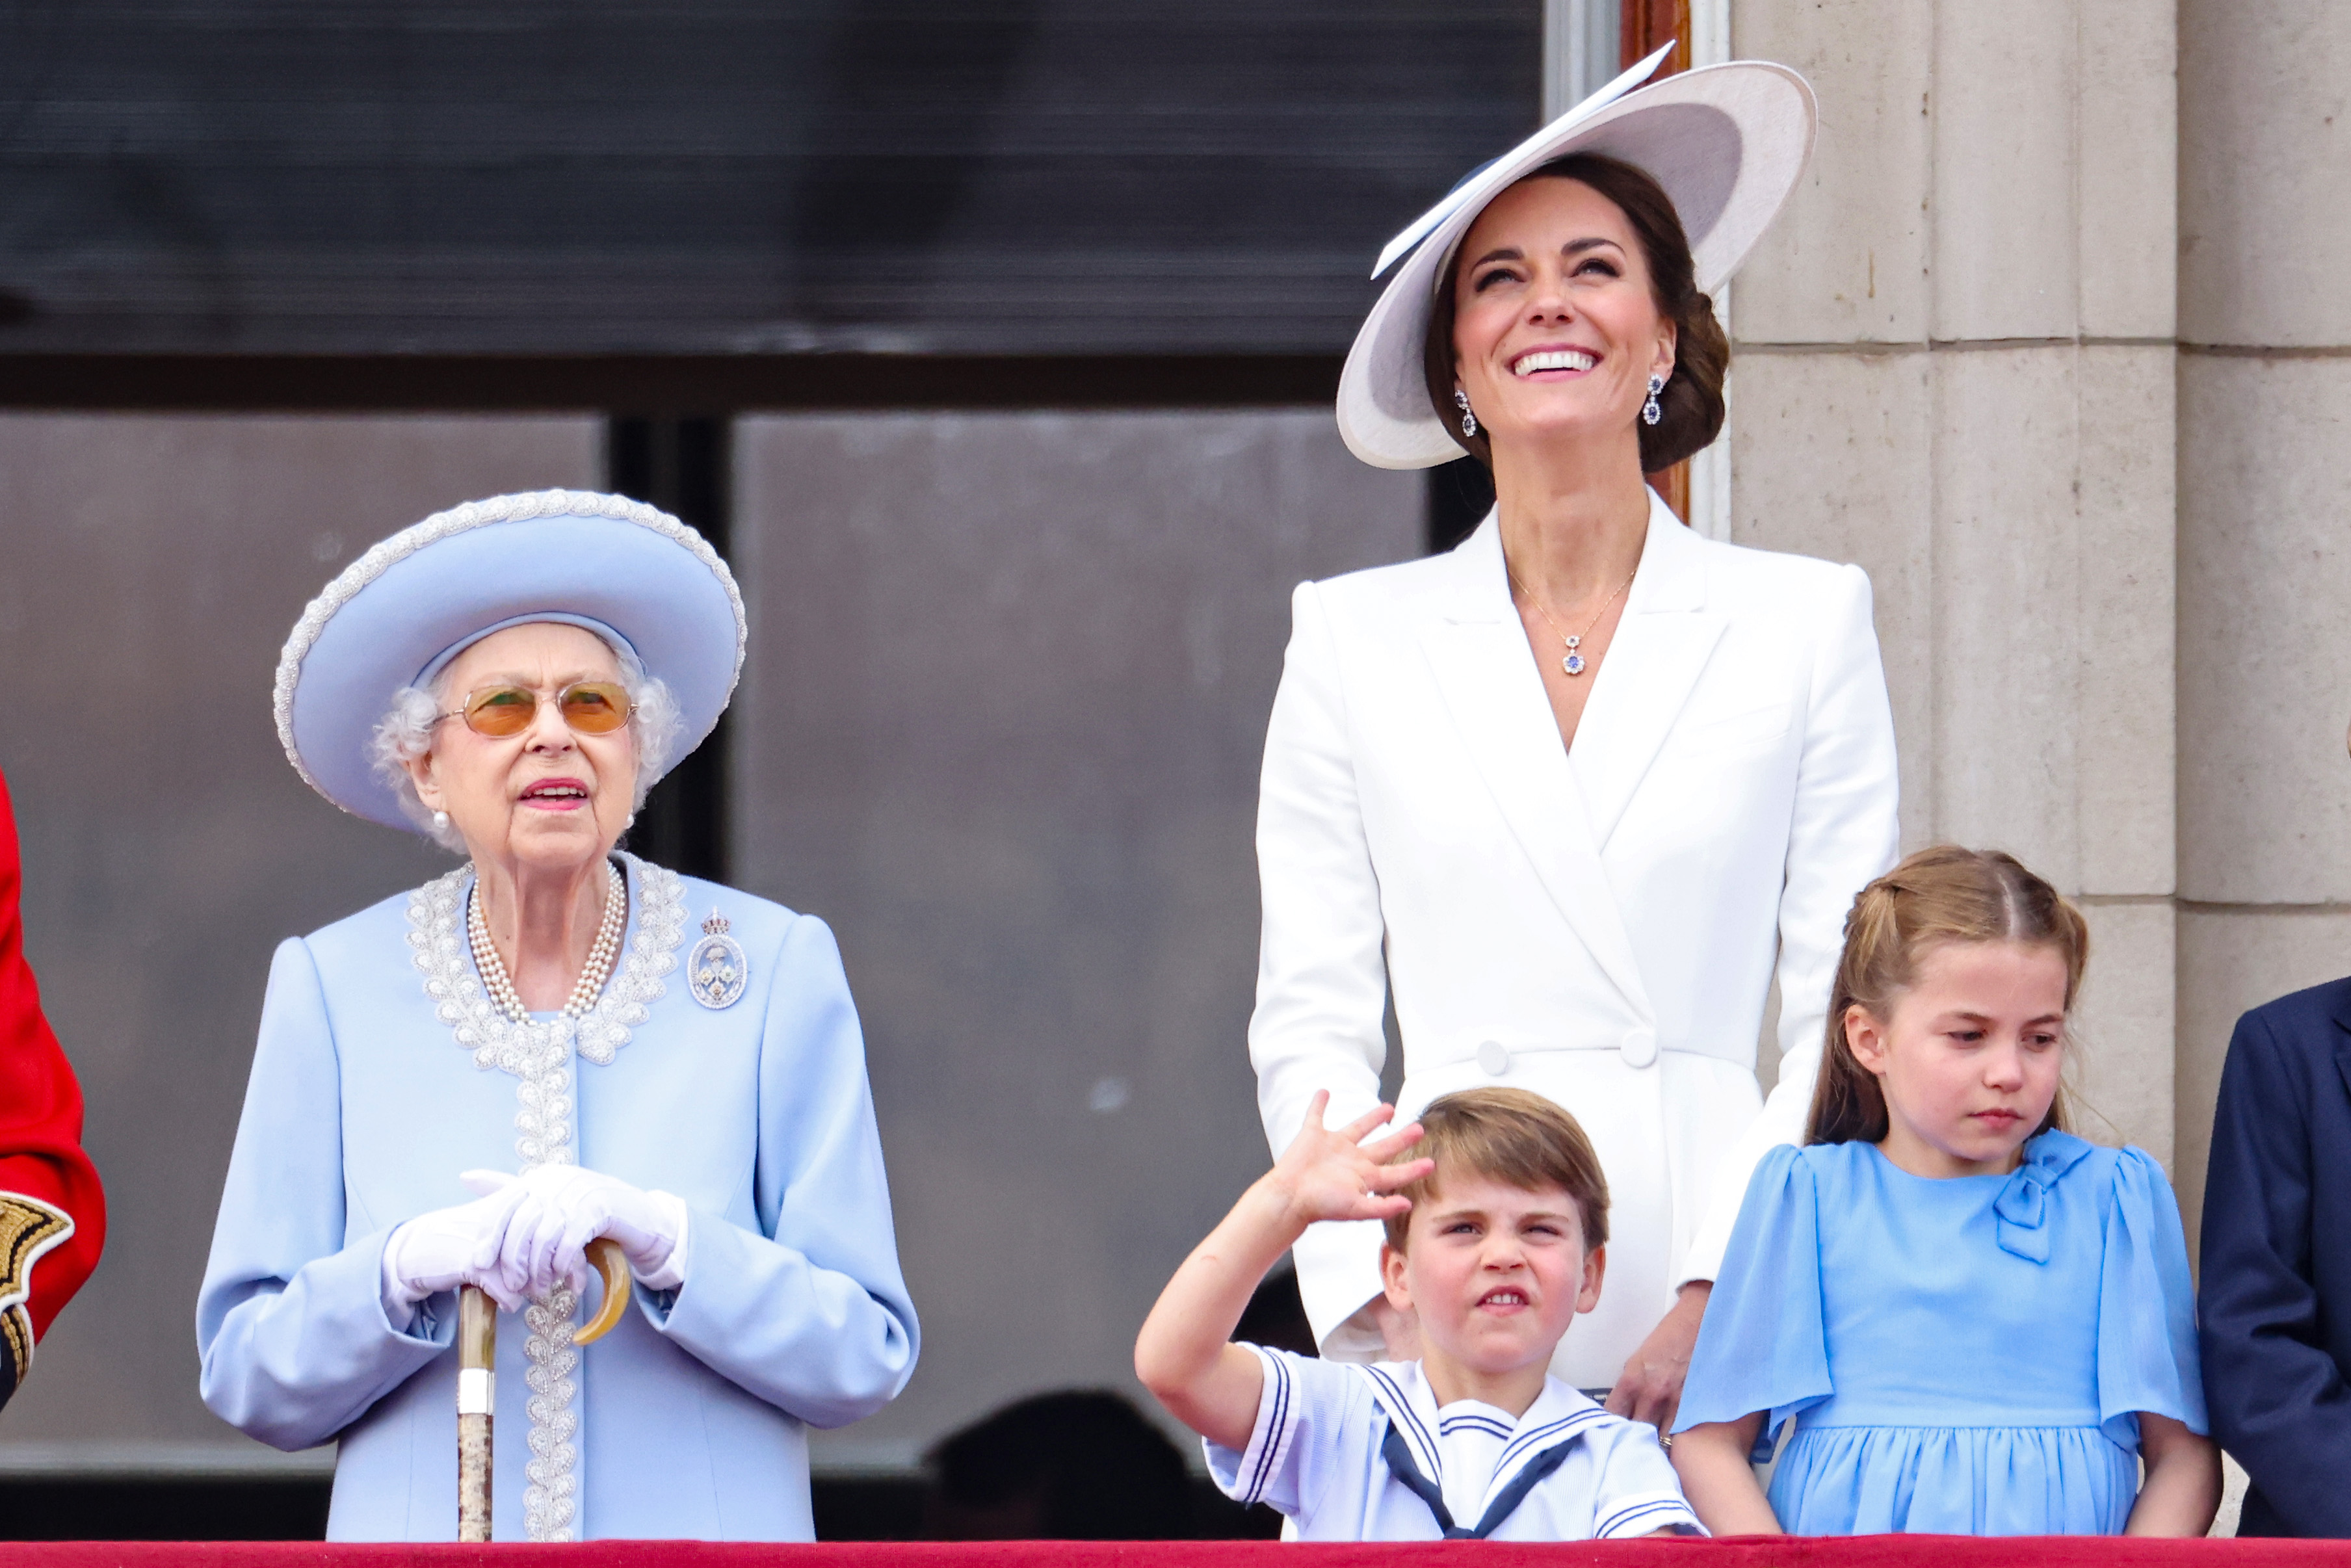 Queen Elizabeth II, Prince Louis, Catherine, Duchess of Cambridge, and Princess Charlotte observing the Trooping the Colour parade from the Buckingham Palace balcony